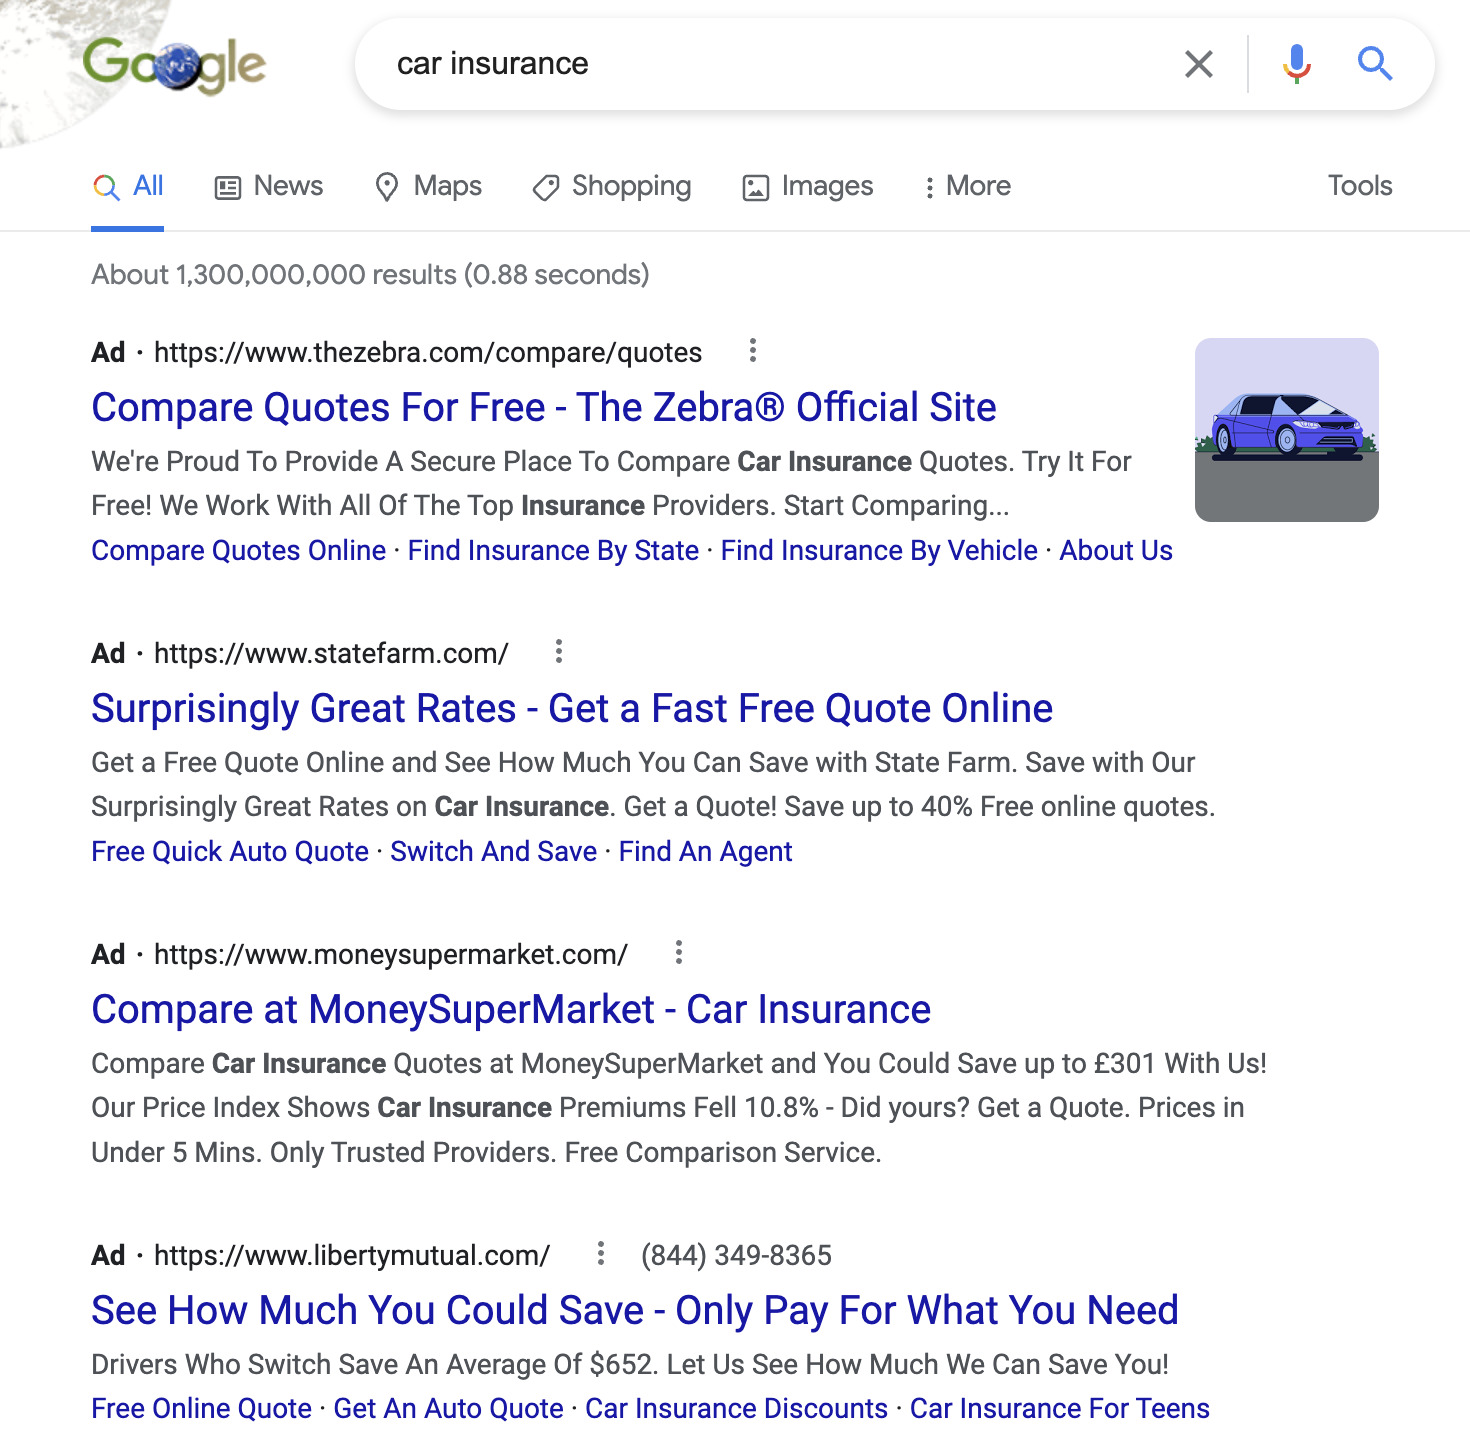 Search results for "car insurance" 